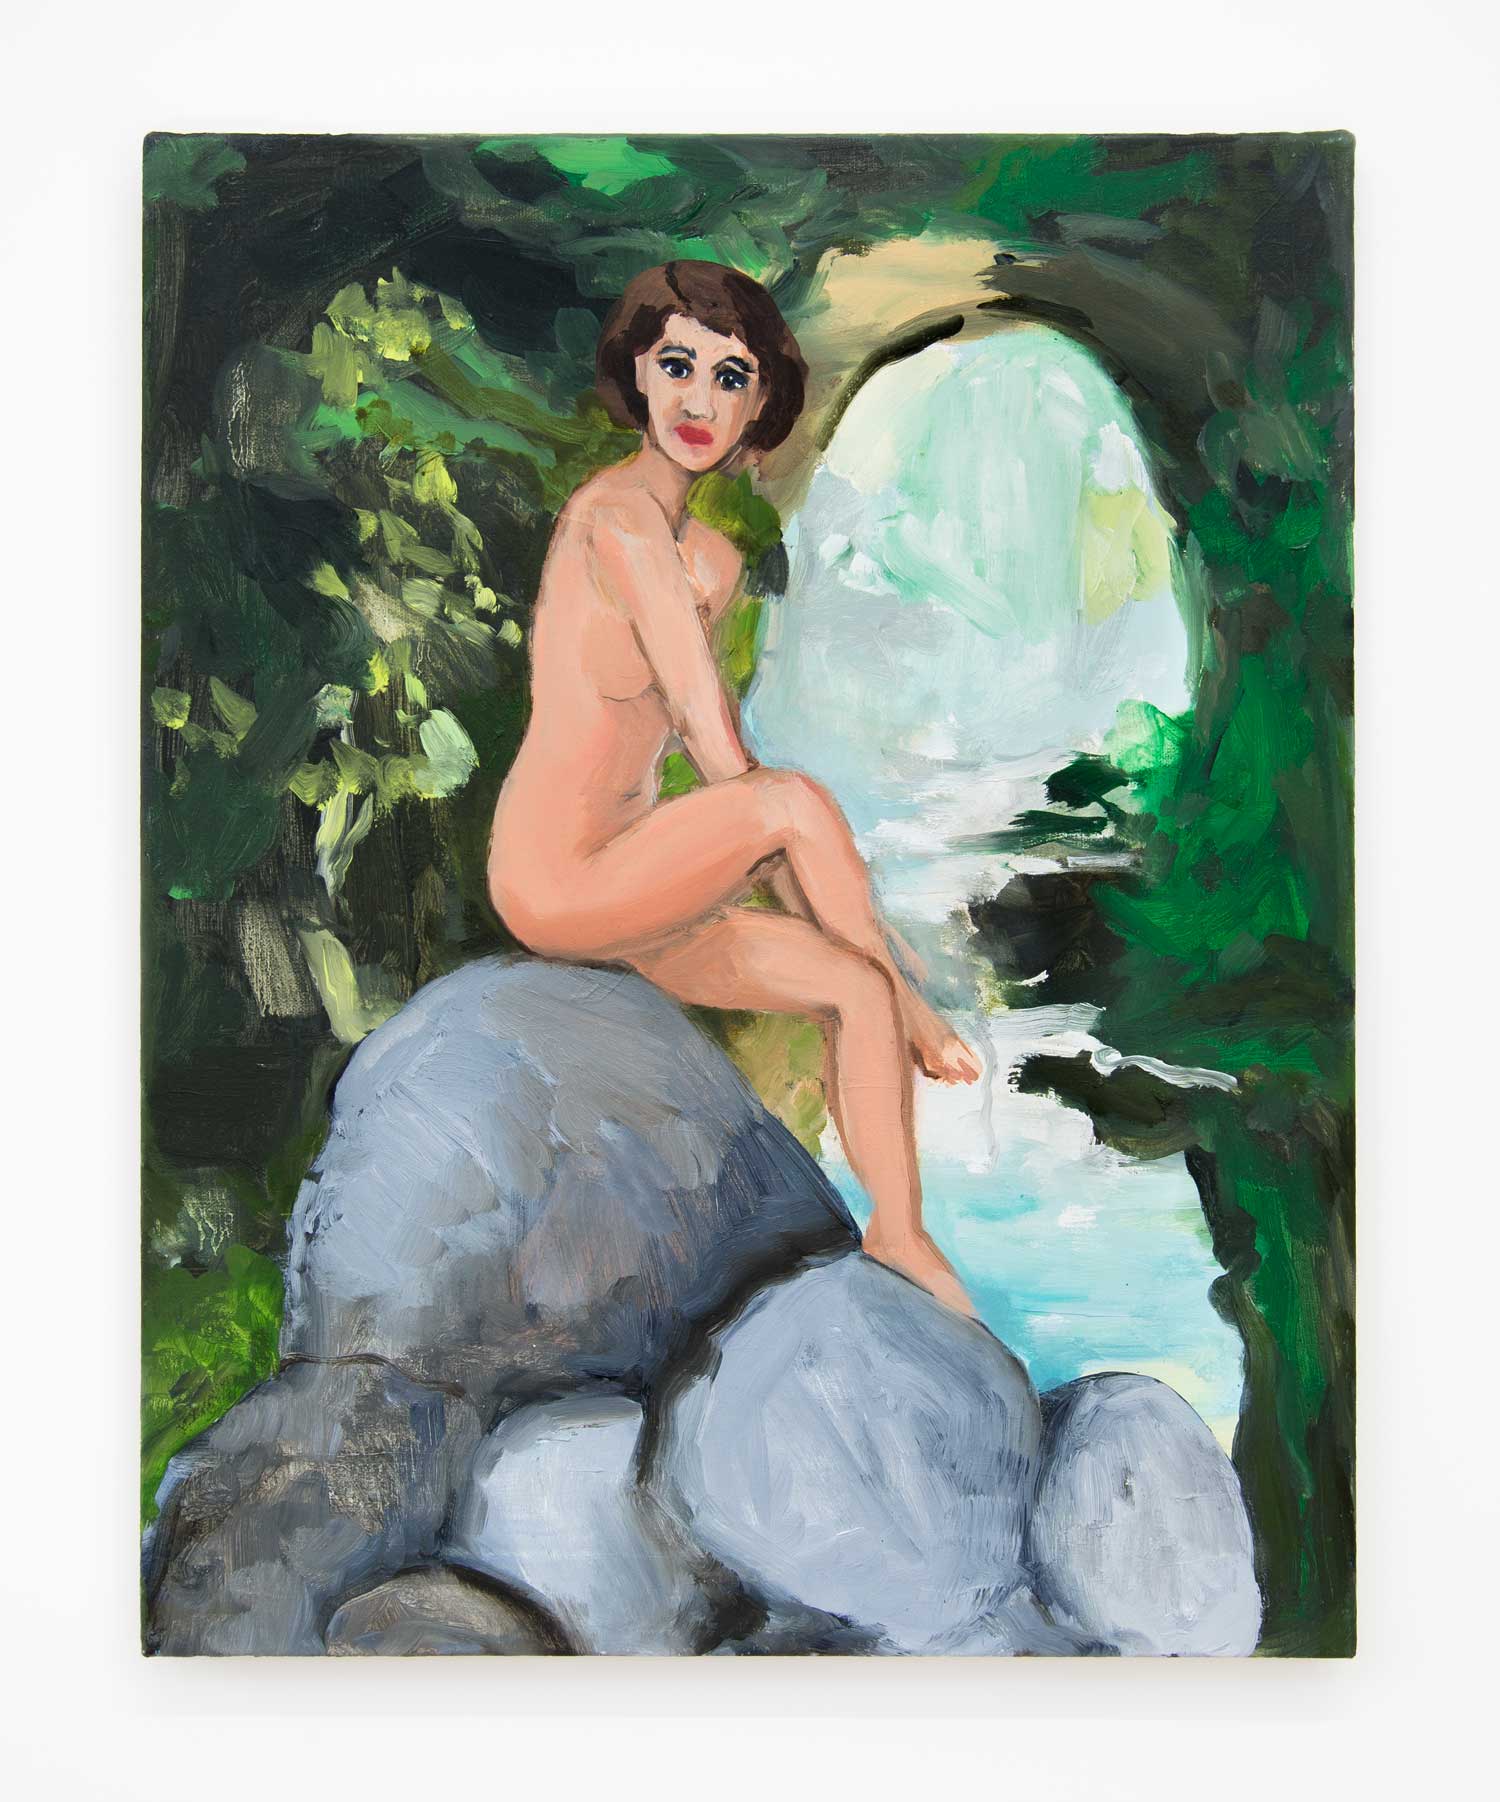 Becky Kolsrud, Untitled Study (Bather with Rocks), 2017, oil on canvas, 20h x 16w in.